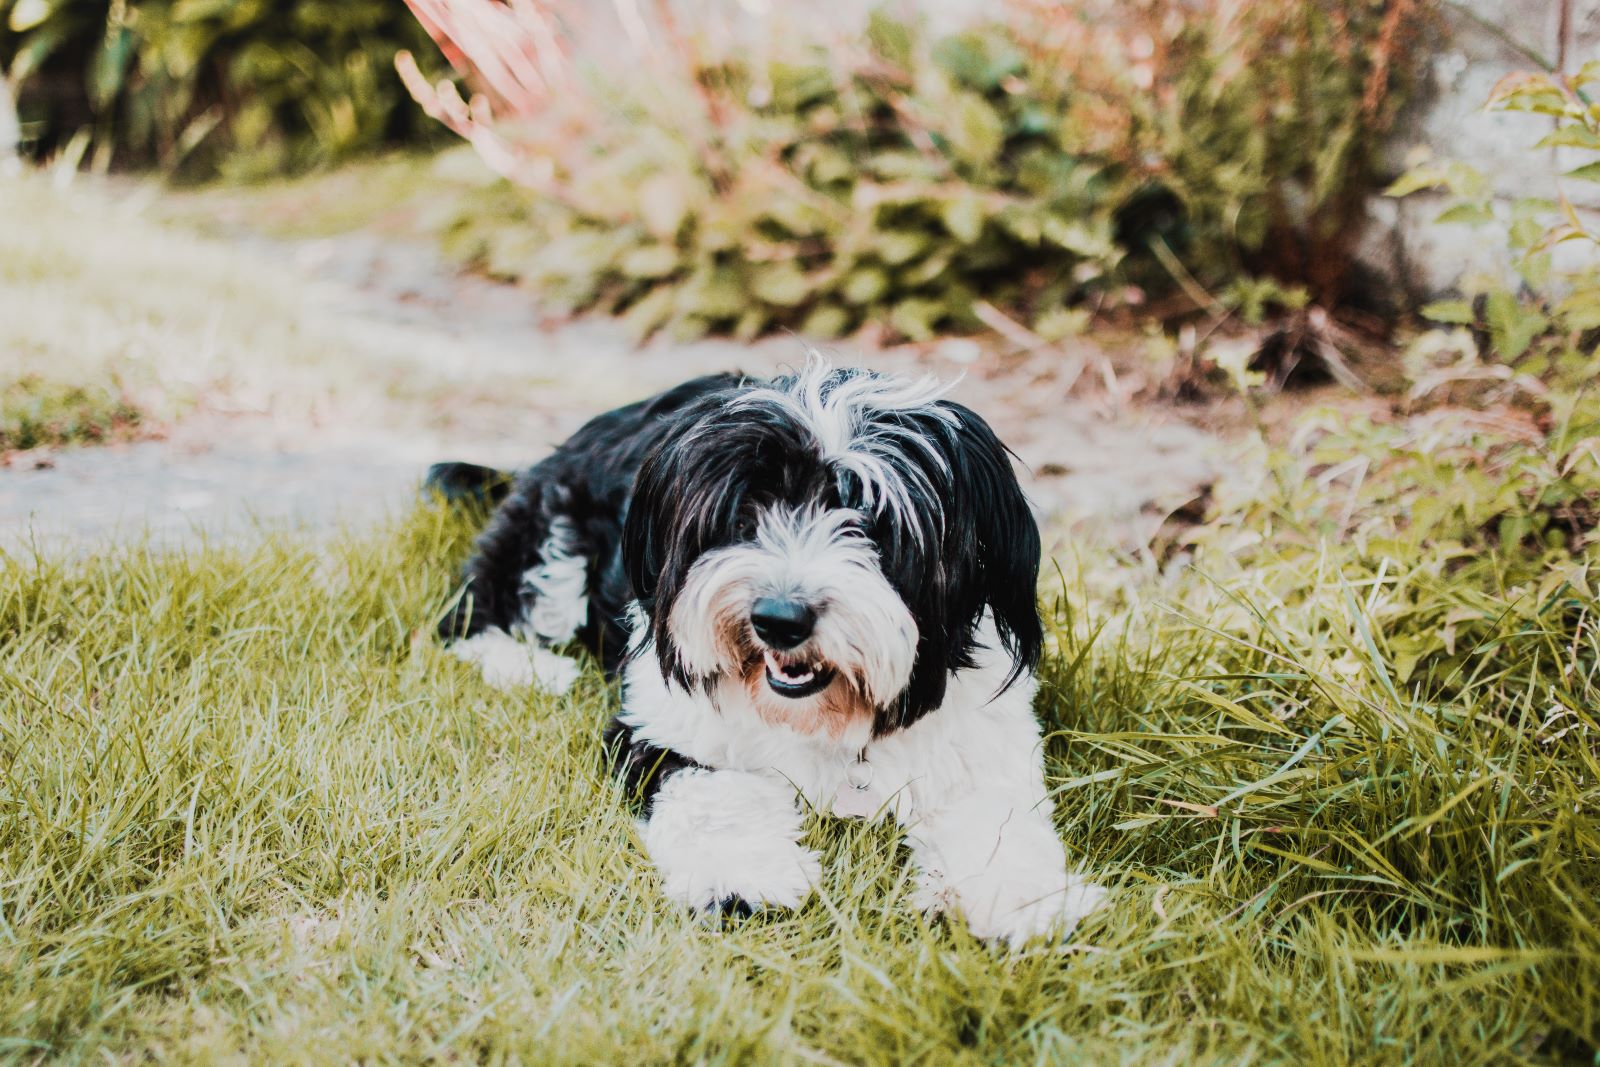 Black and white Shih Tzu laying in the green grass with a path and garden in the background